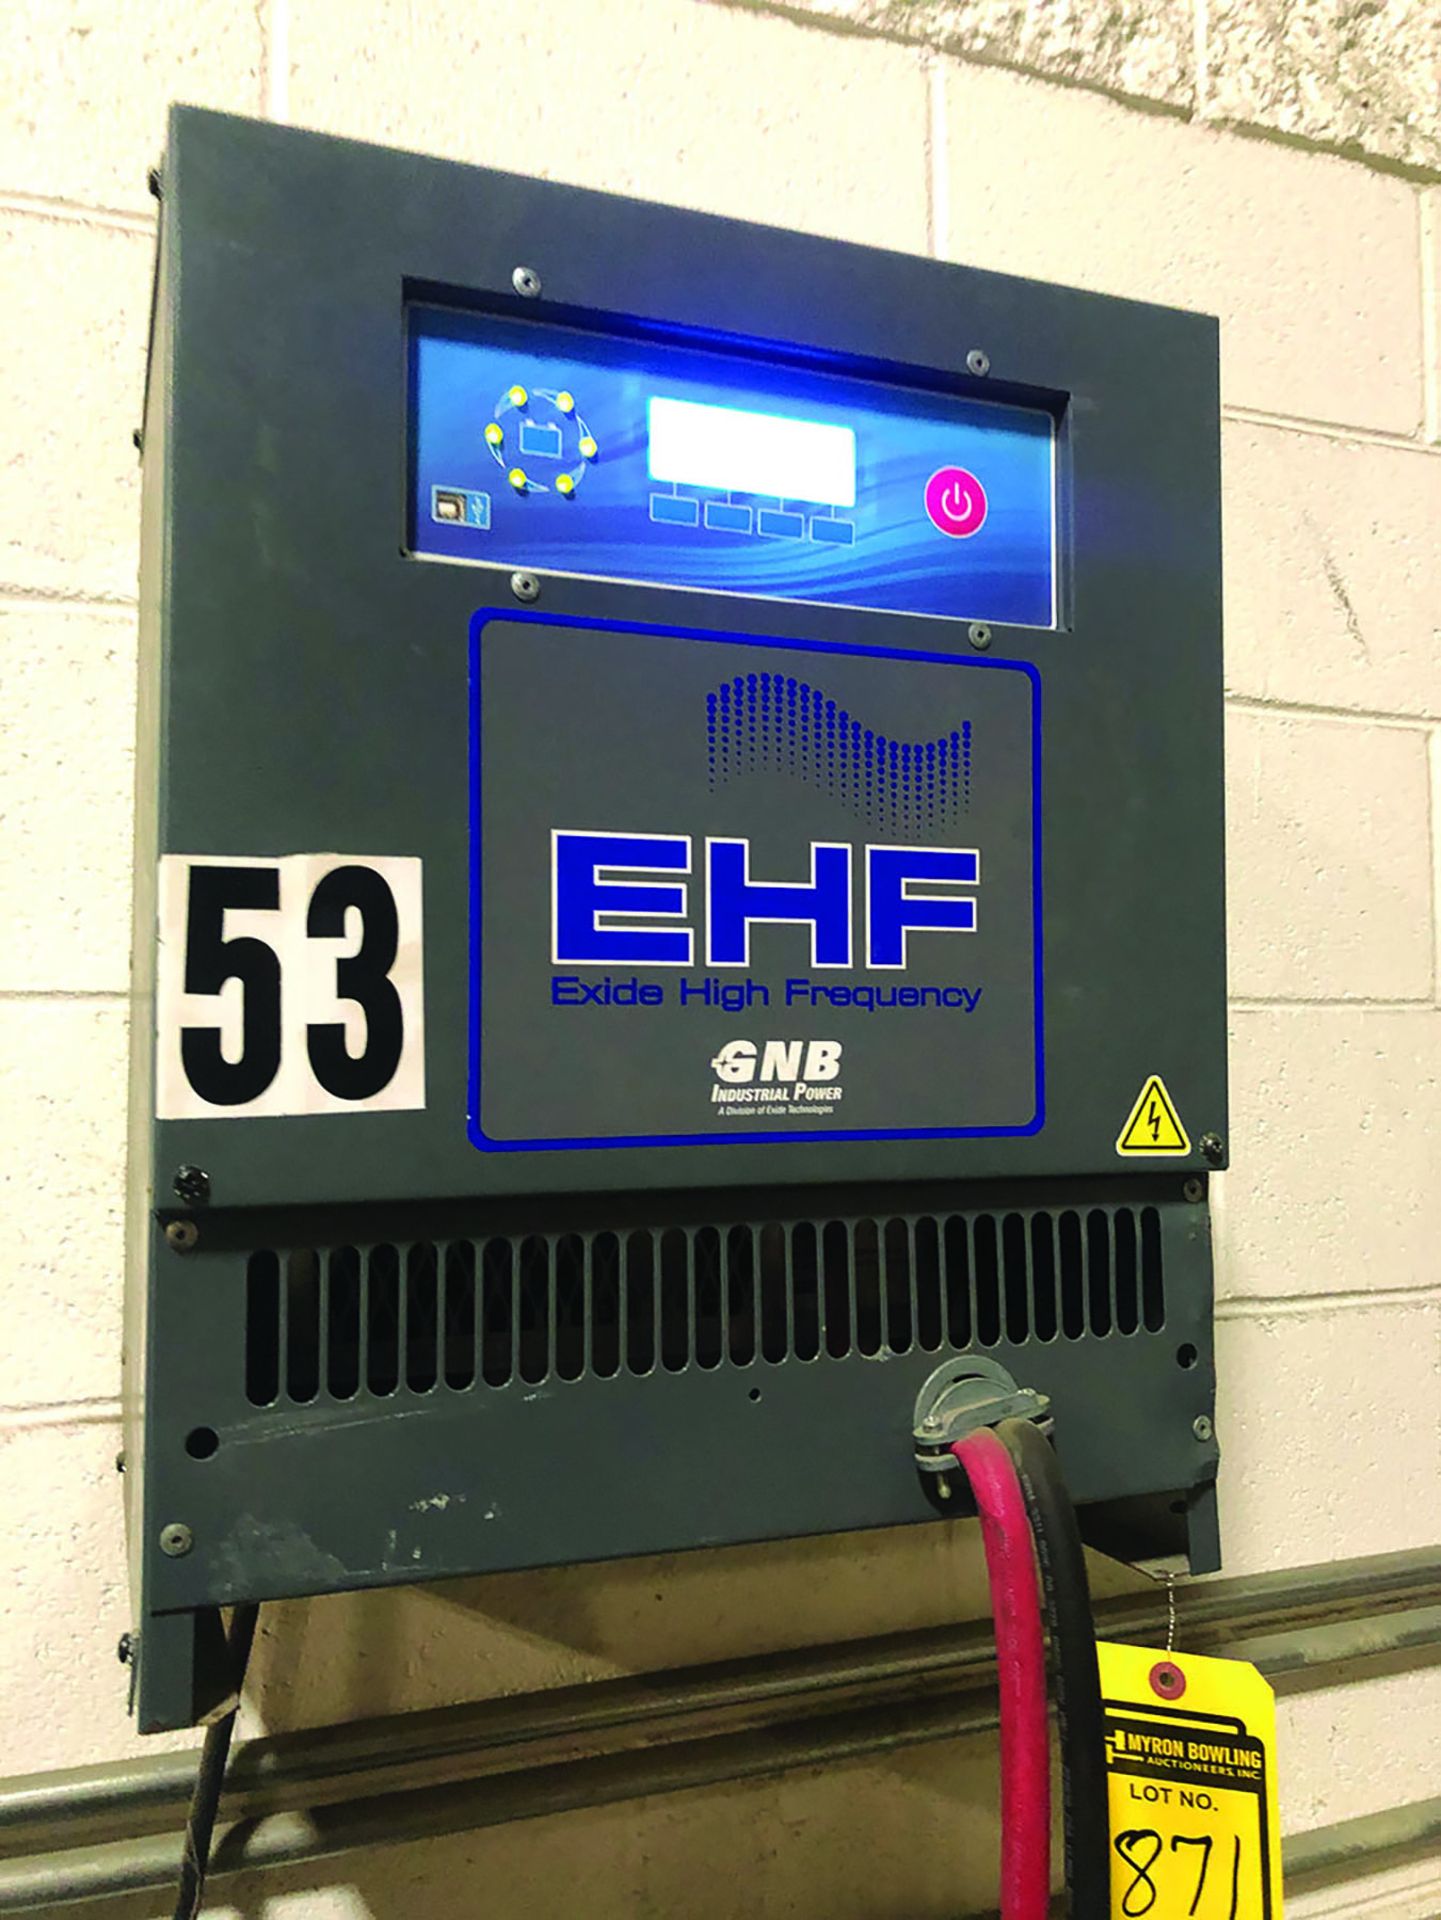 INDUSTRIAL BATTERY CHARGER EXIDE HIGH FREQUENCY, MODEL # EHF242130M, S/N- MRHF0084, 12 CELL, 3